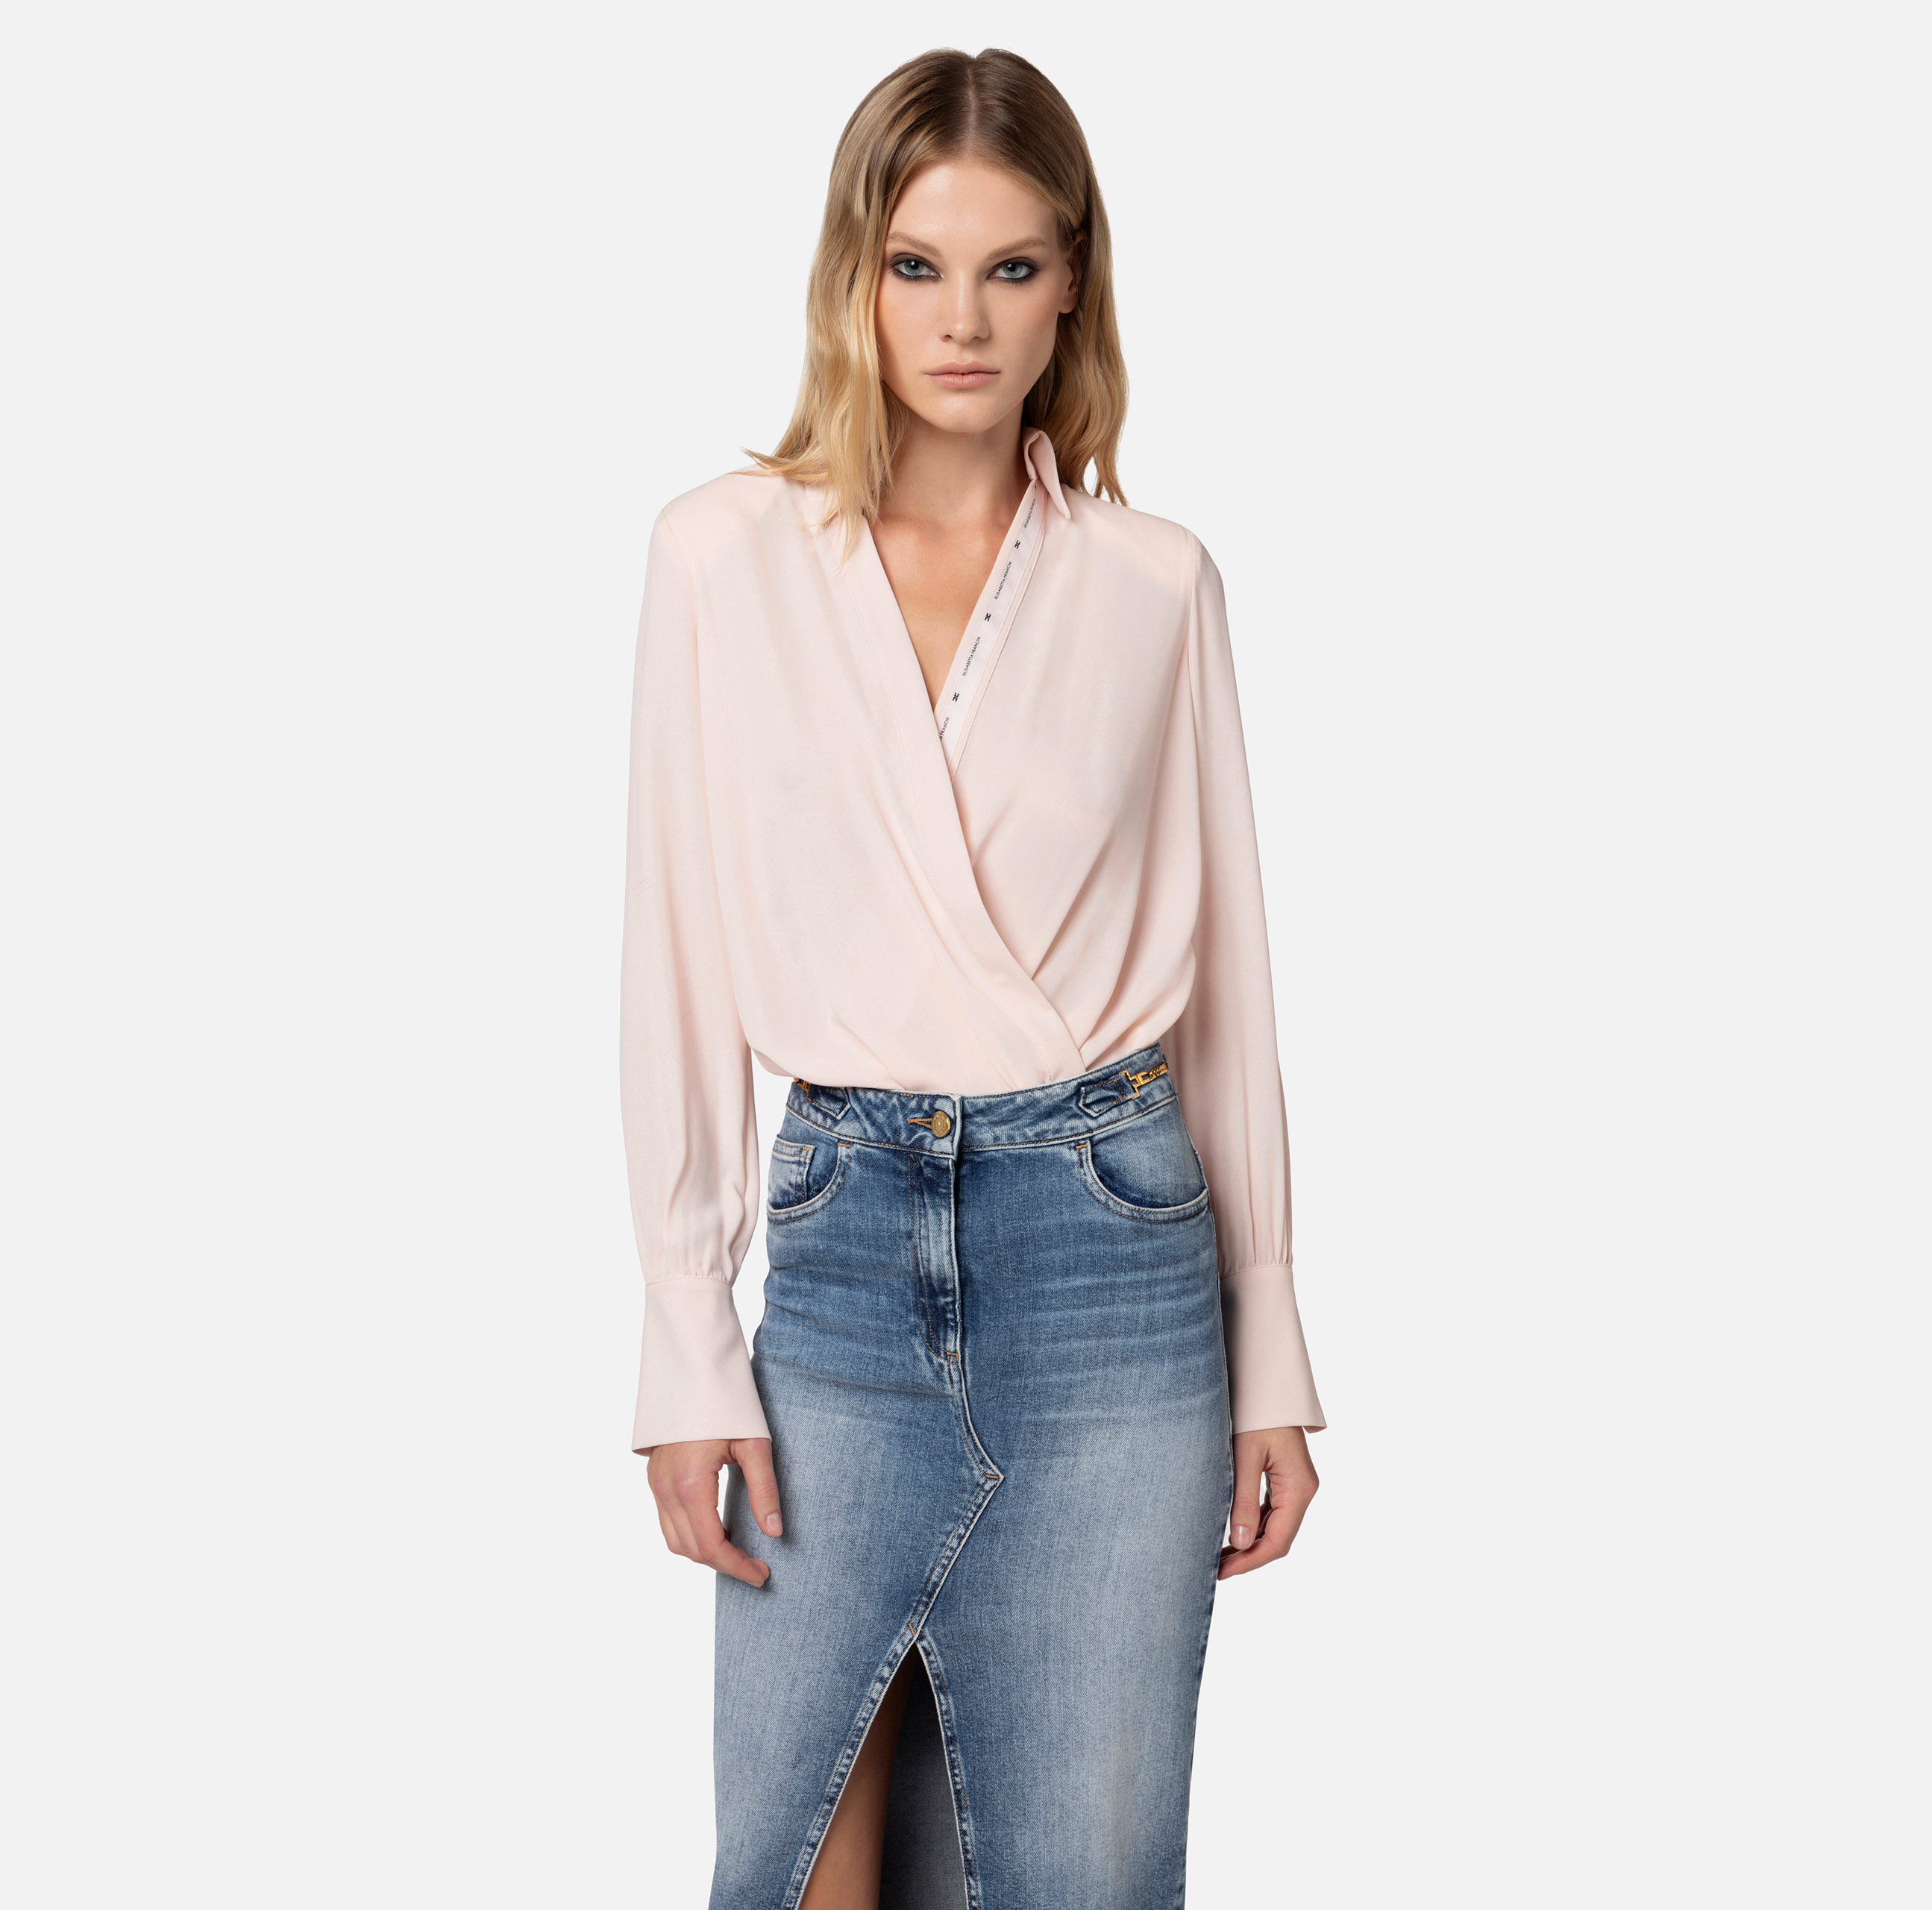 Crossed bodysuit-style shirt in georgette fabric with logoed ribbon - Elisabetta Franchi